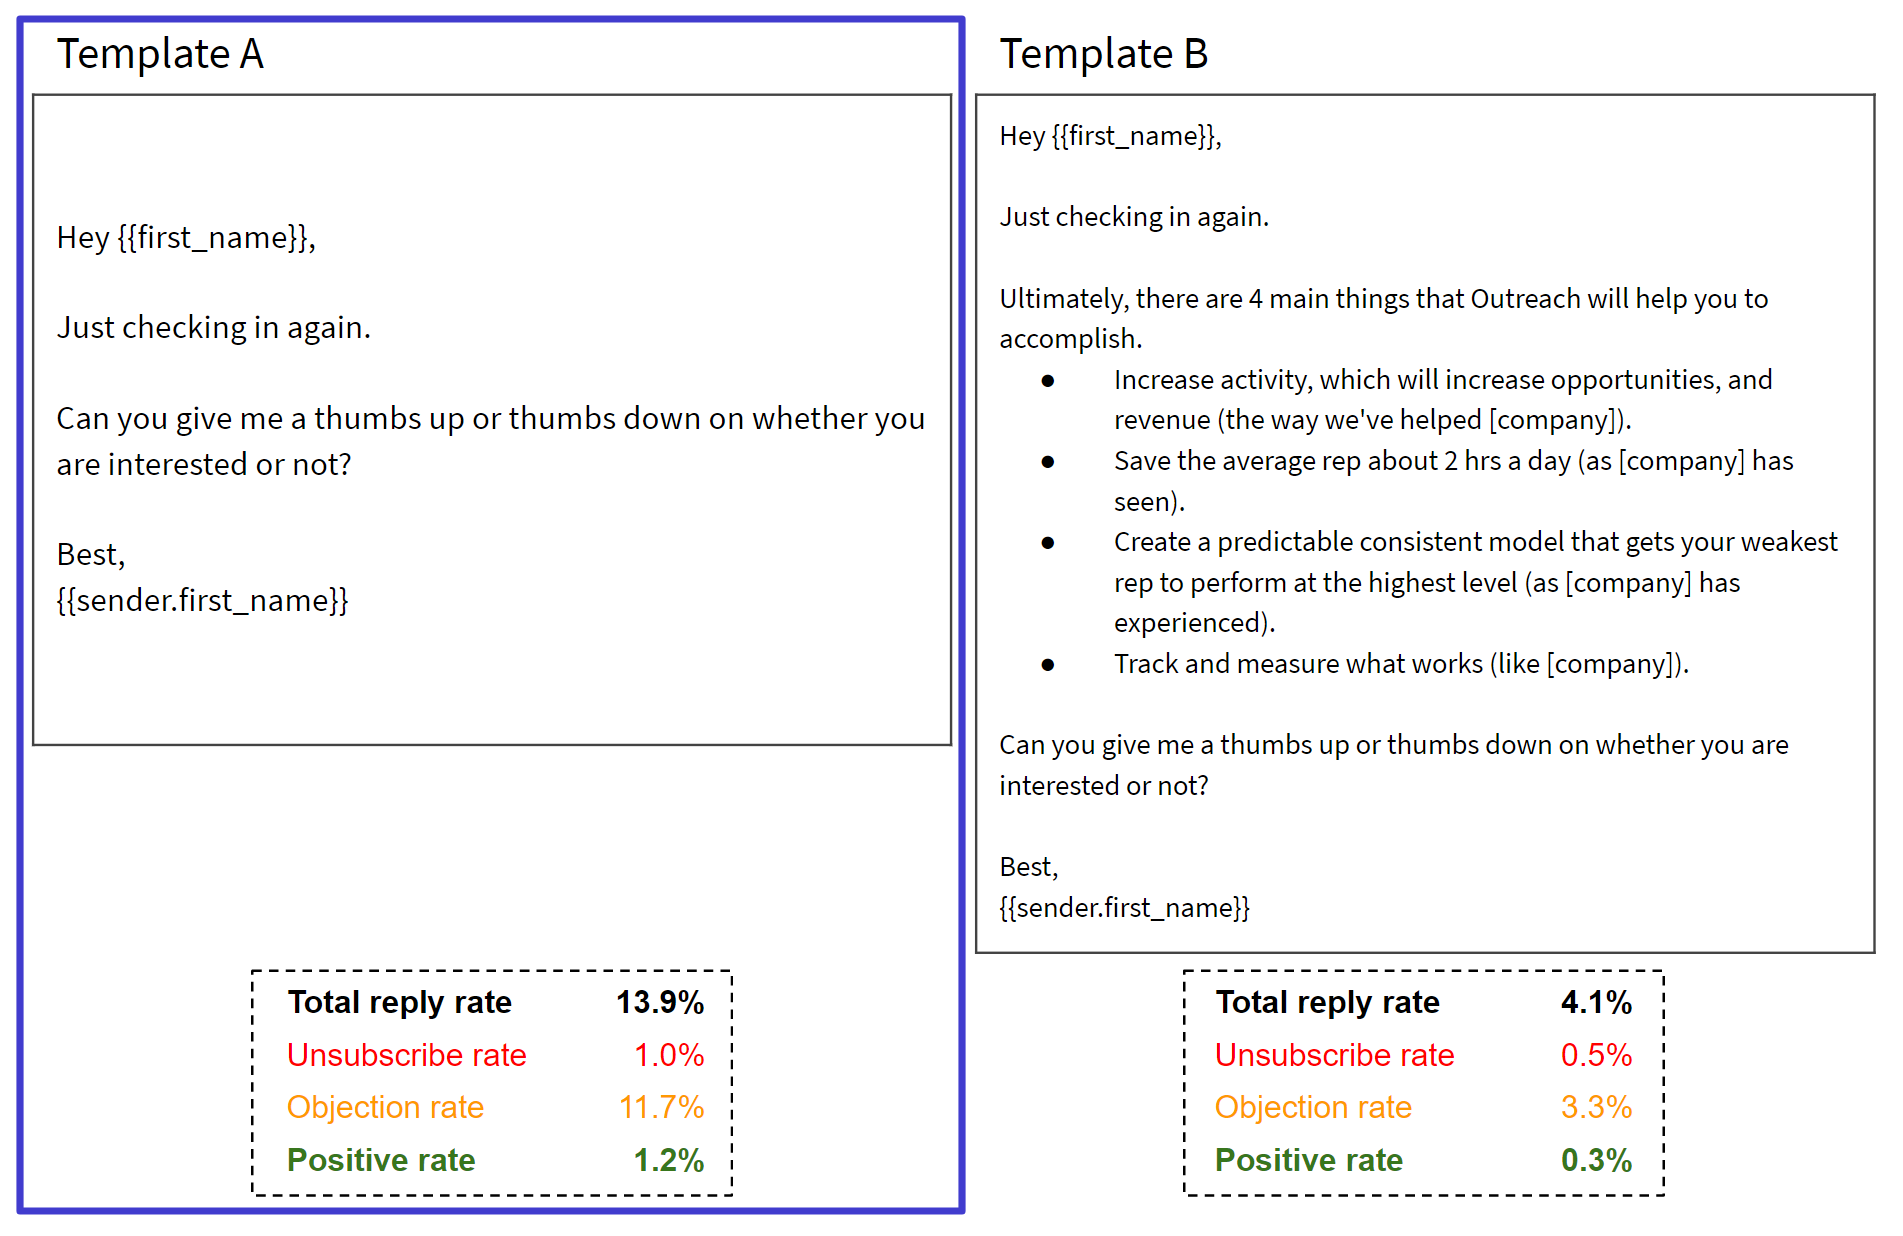 email templates, comparing conversion points